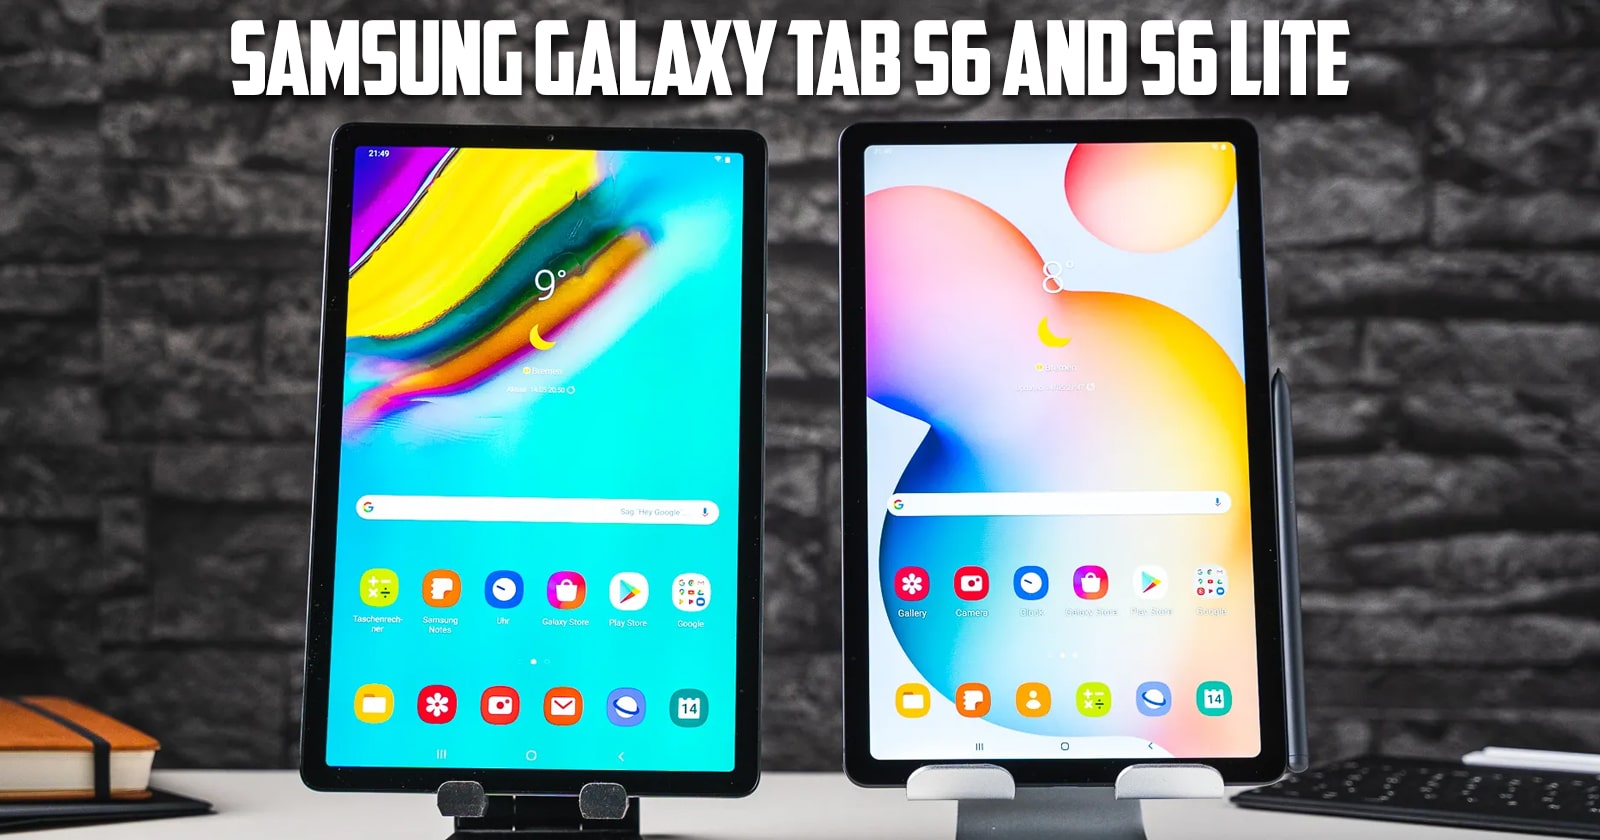 What Is the Difference Between Samsung Galaxy Tab S6 and S6 Lite?